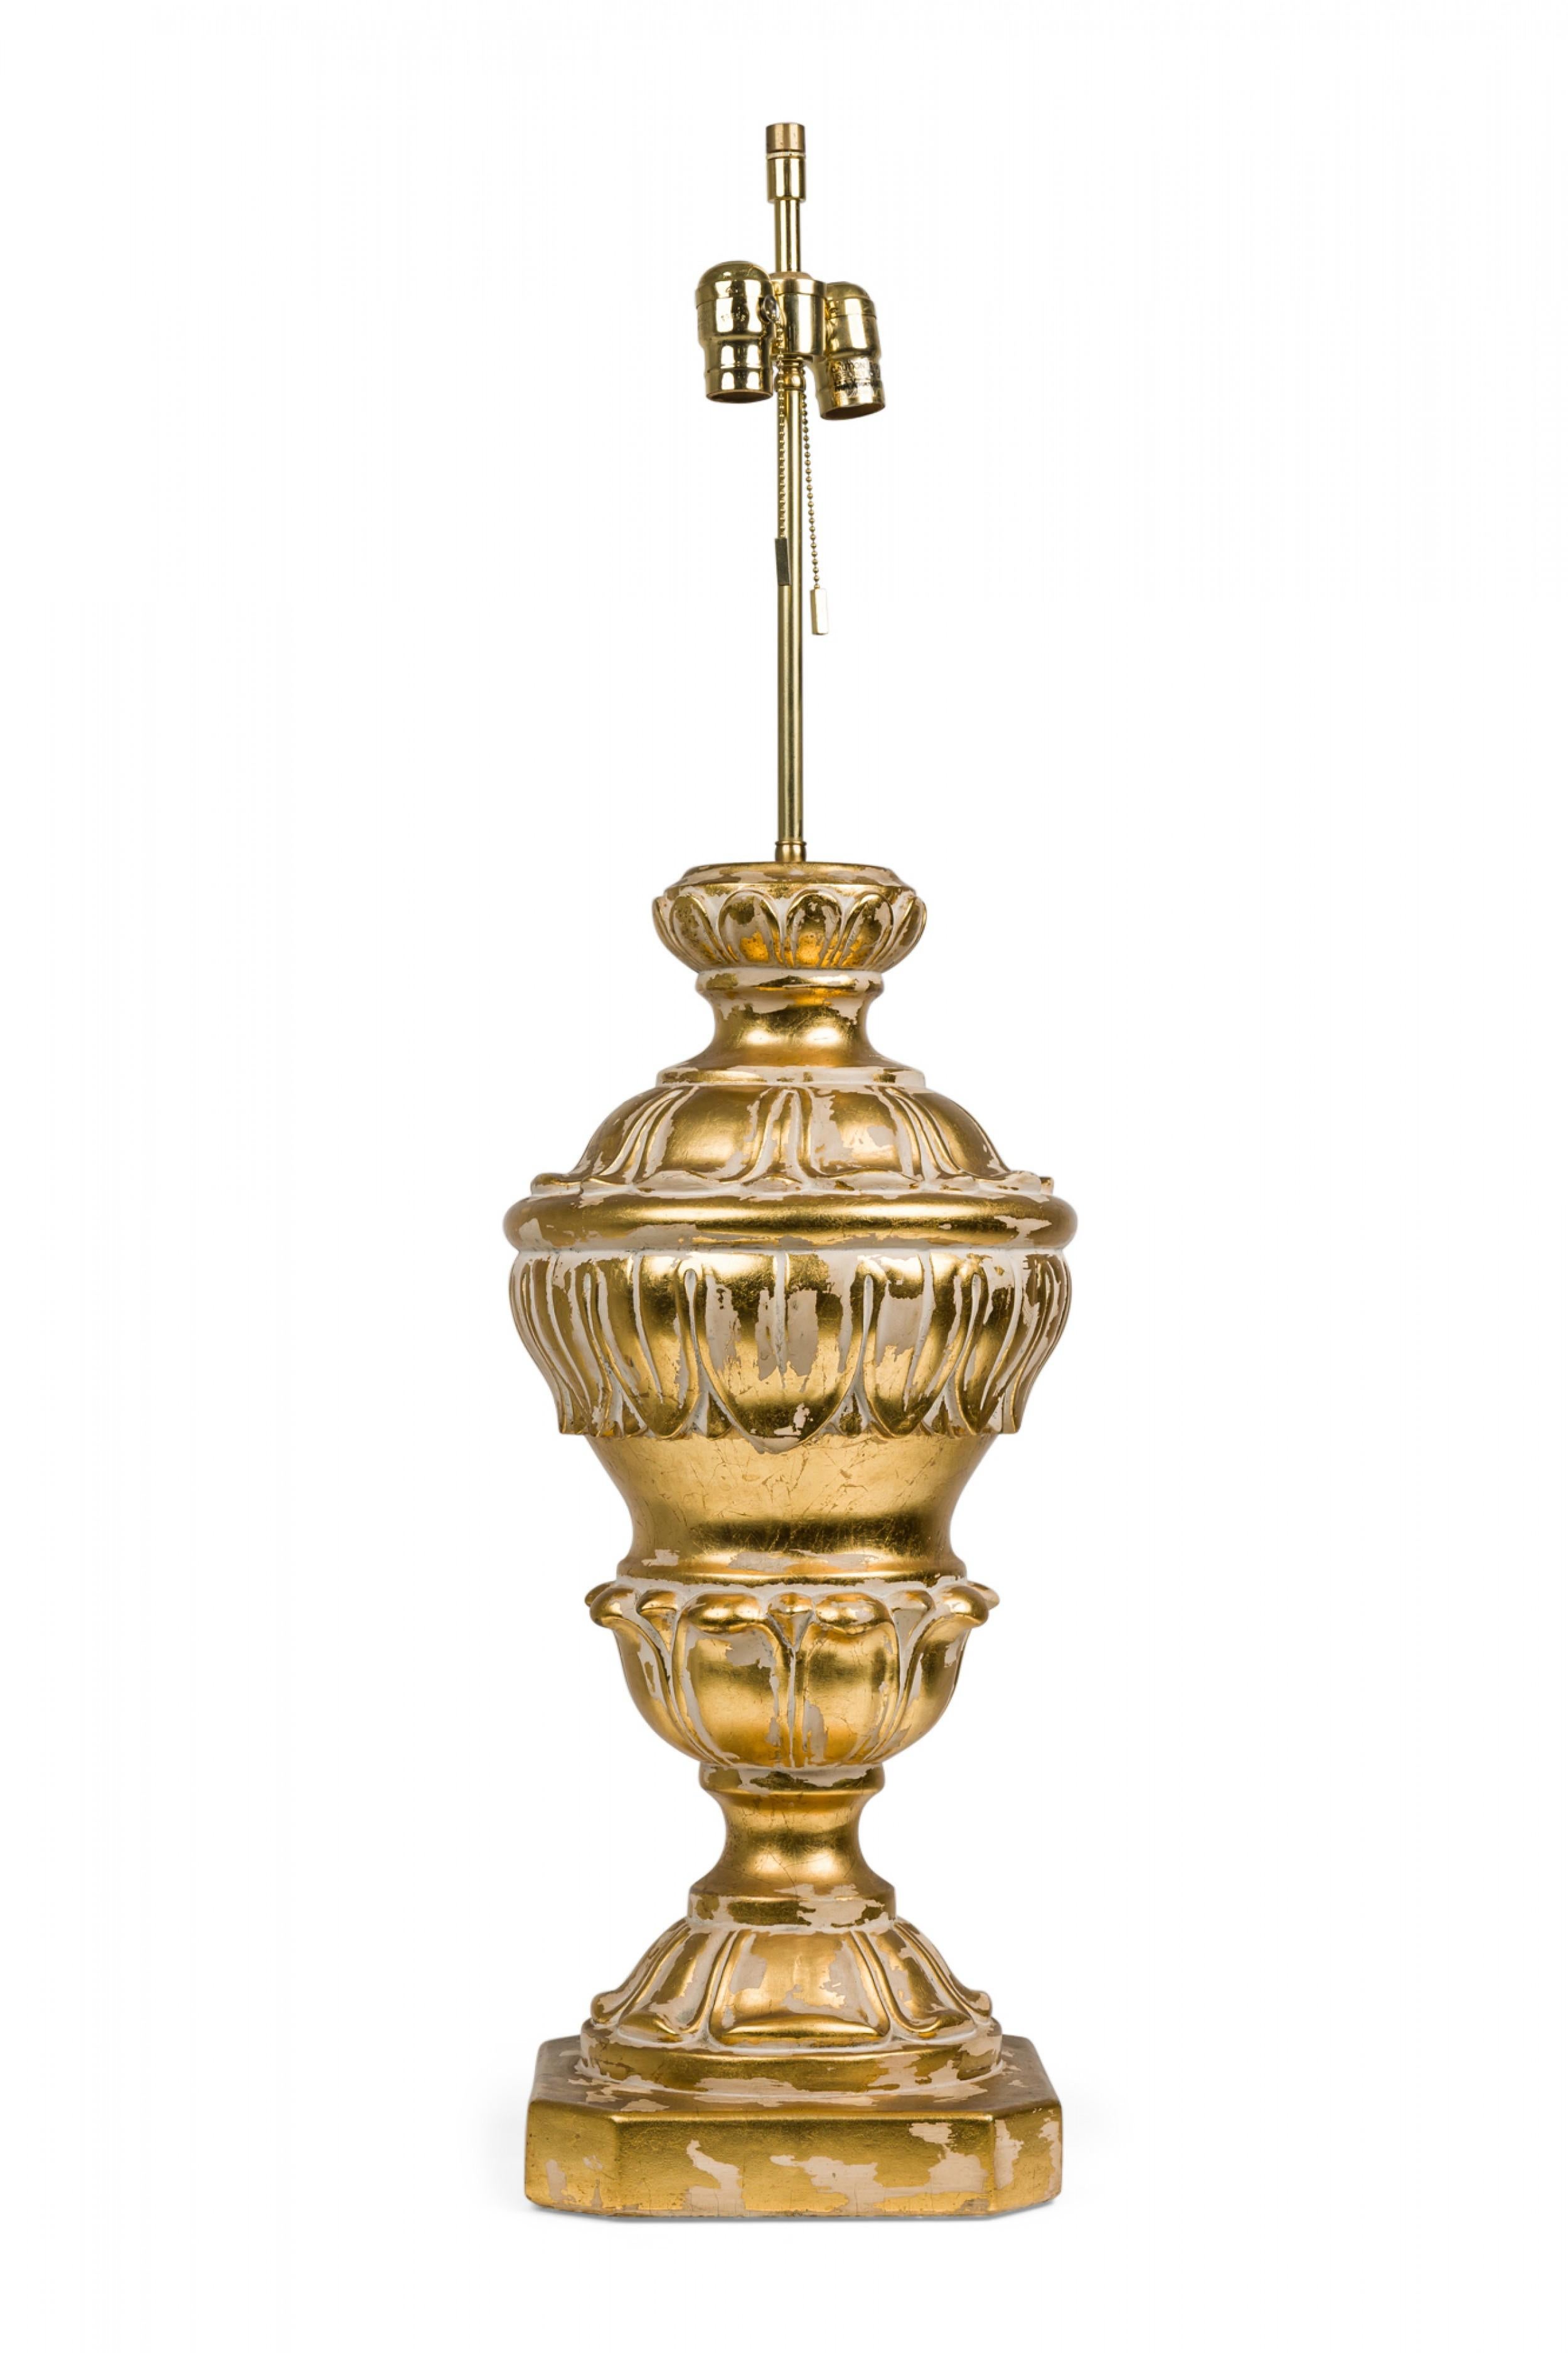 20th Century Pair of Frederick Cooper American Plaster Parcel Gilt Baluster Table Lamps For Sale